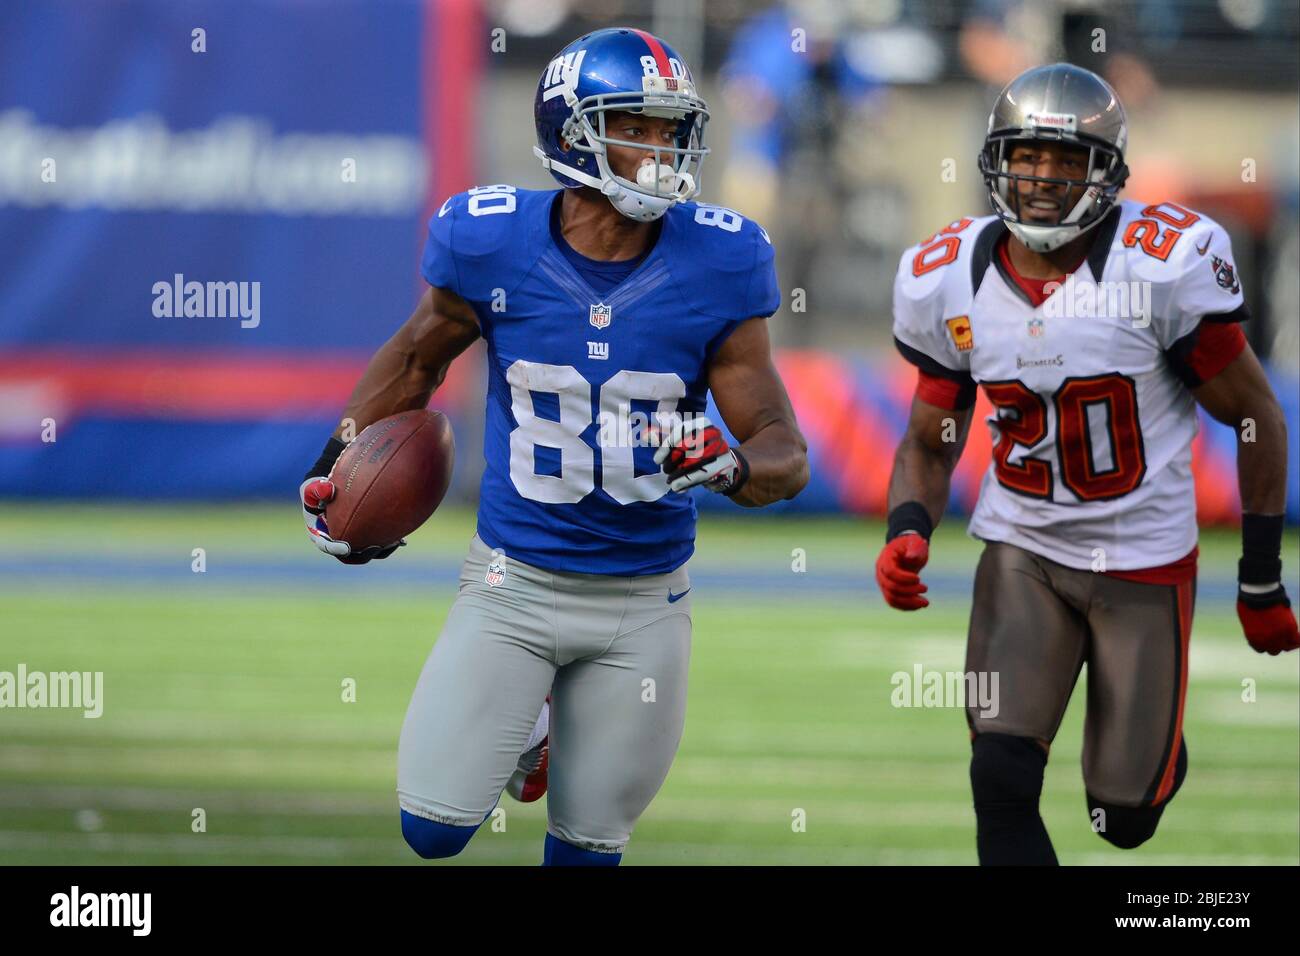 16 September 2012: New York Giants wide receiver Victor Cruz (80) makes a touchdown catch during a week 2 NFL NFC matchup between the Tampa Bay Buccan Stock Photo